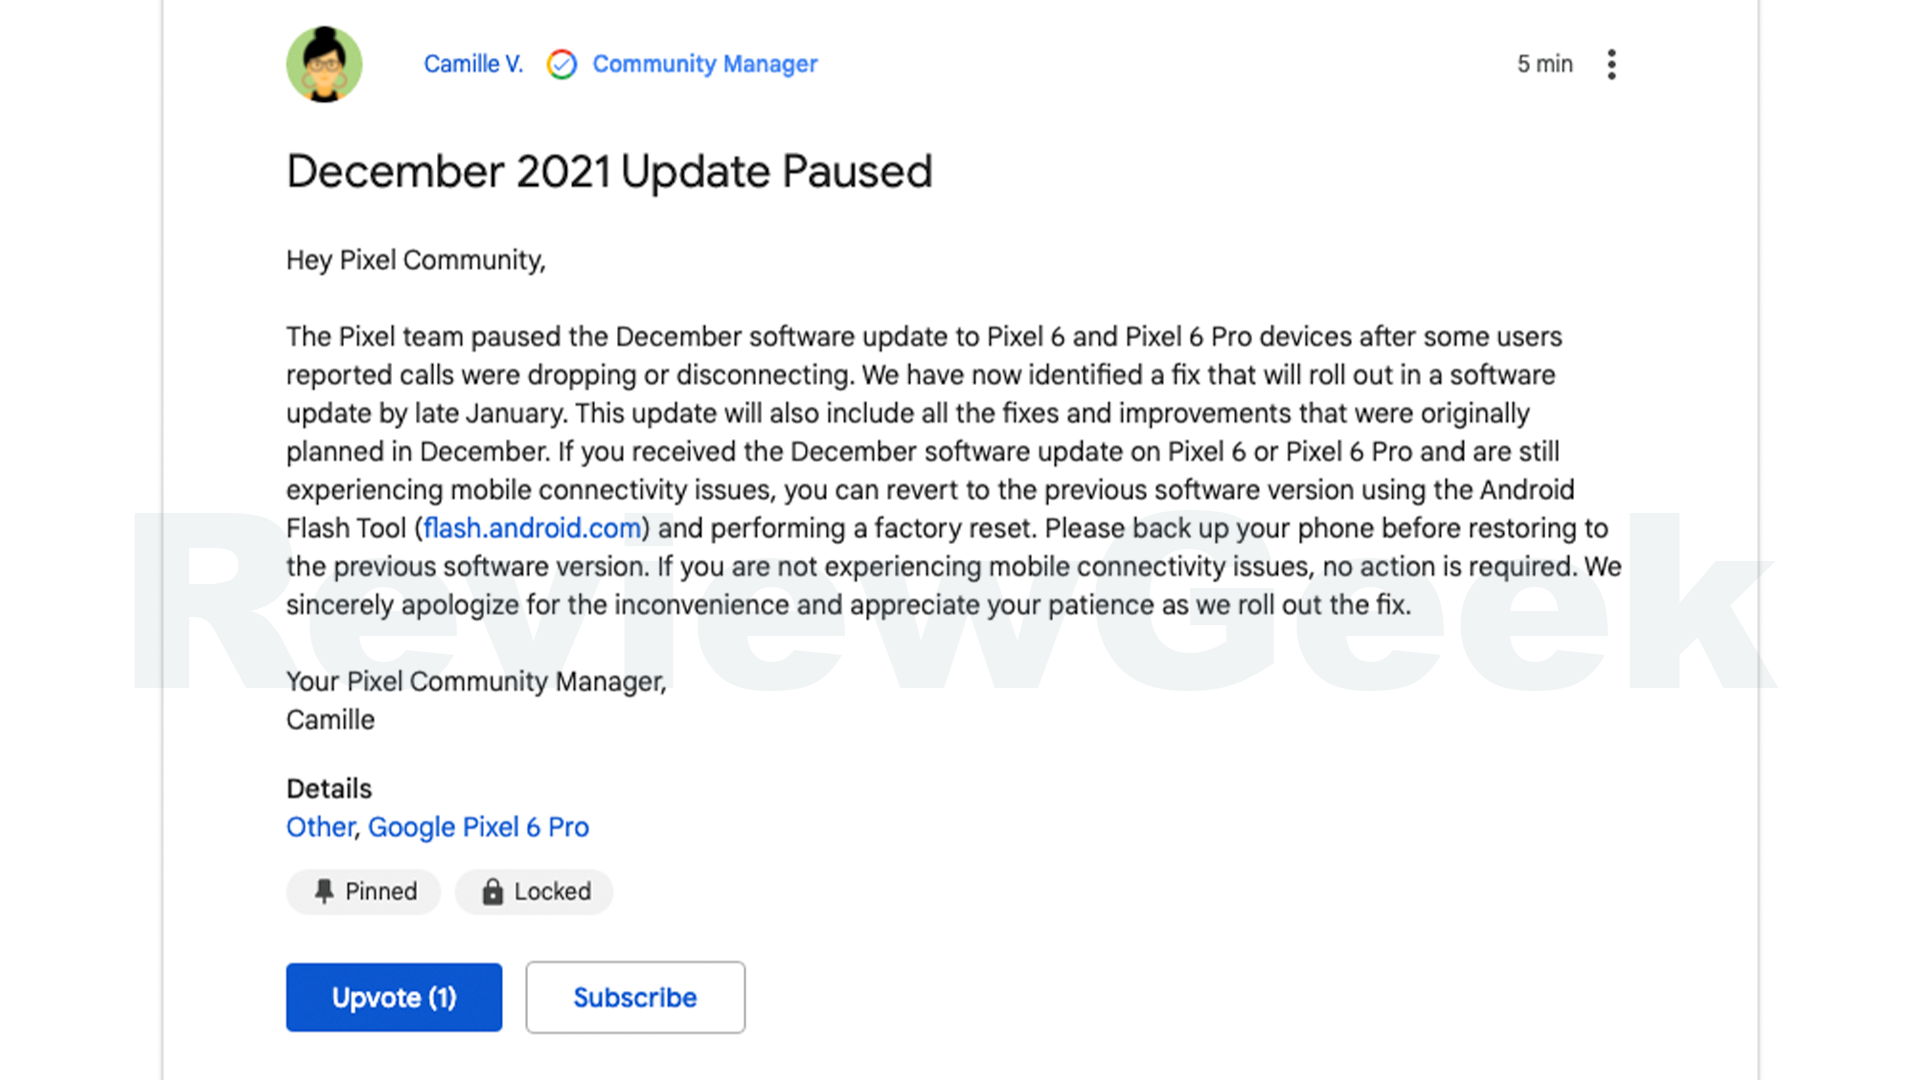 The Google Support post, which reads &quot;The Pixel team paused the December software update to the Pixel 6 and Pixel 6 Pro devices after some users reported calls were dropping or disconnecting. We have now identified a fix that will roll out in a software update by late January. This update will also include all the fixes and improvements that were originally planned in December.&quot;